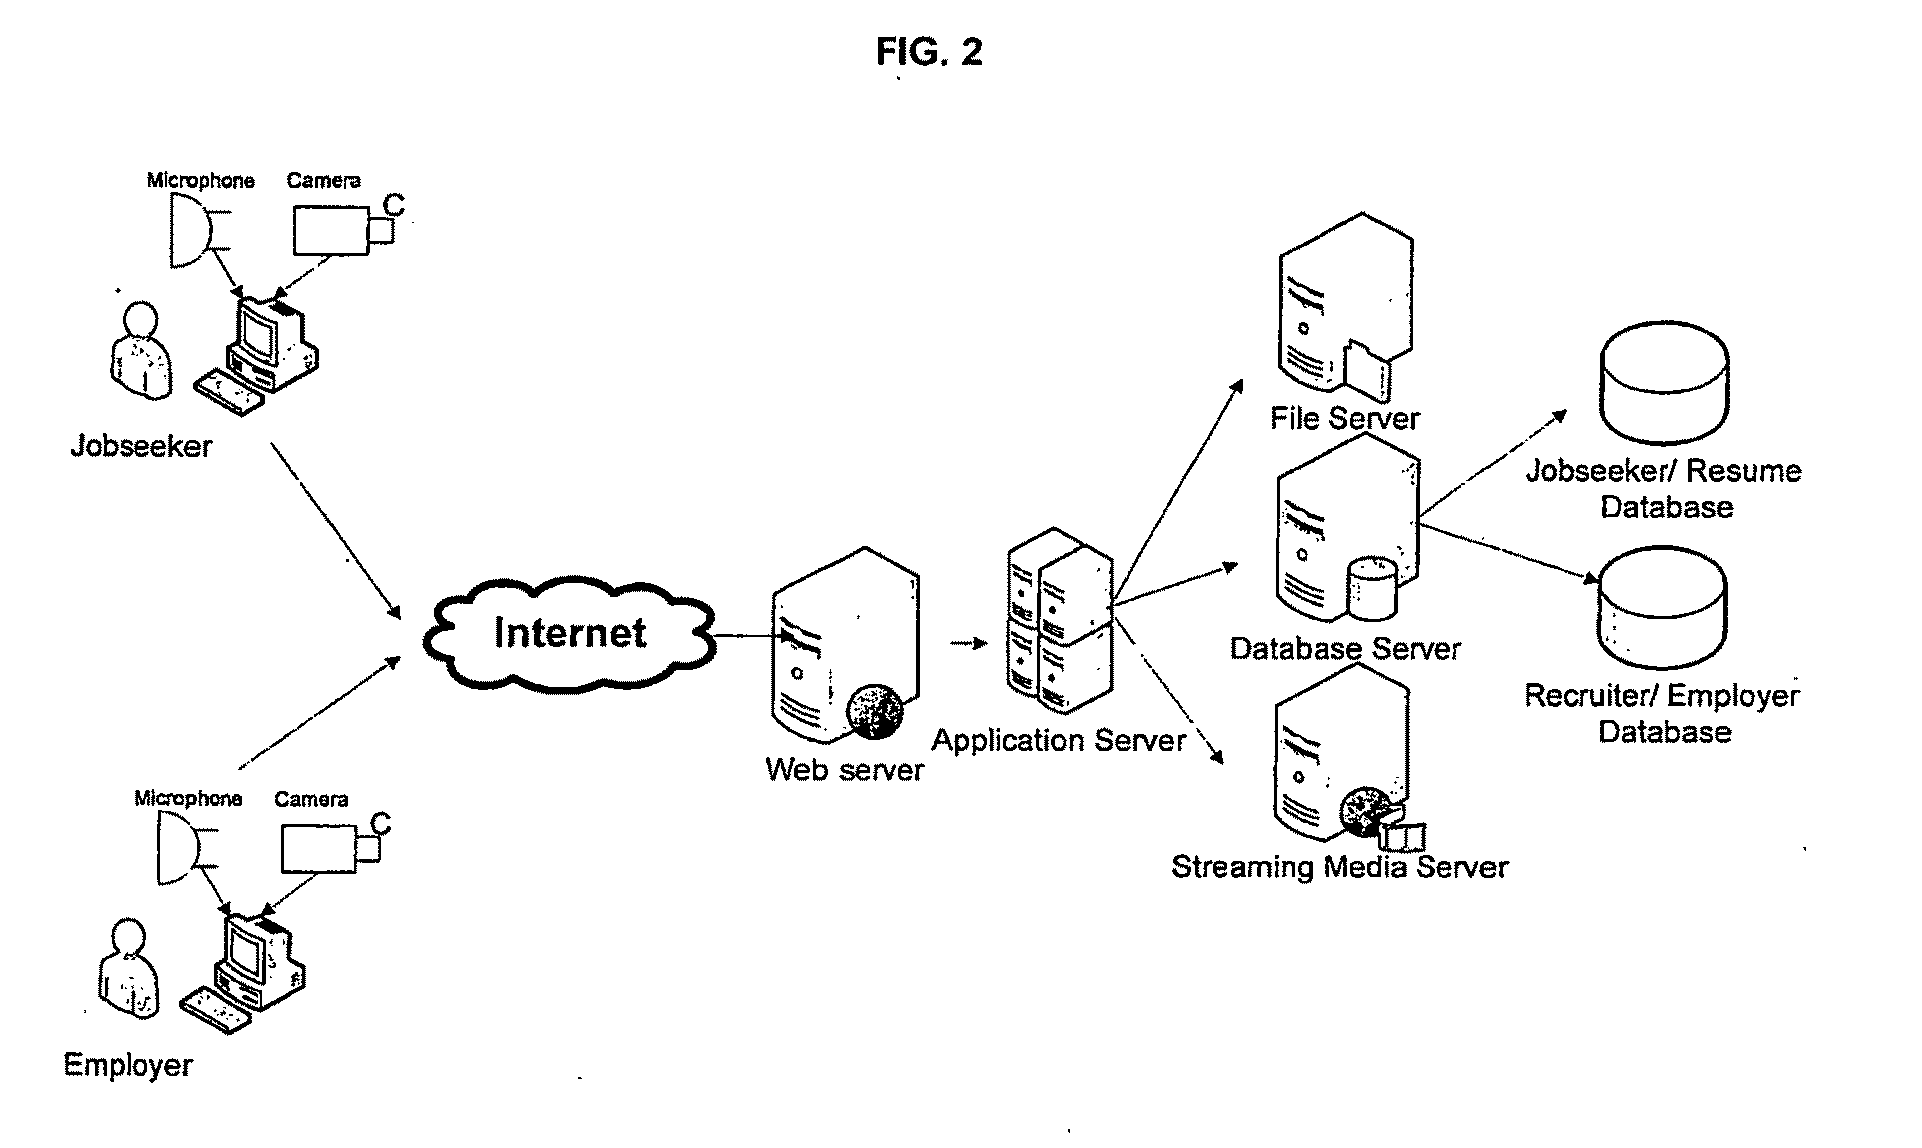 System and Method for Interactive Interview and Recruitment